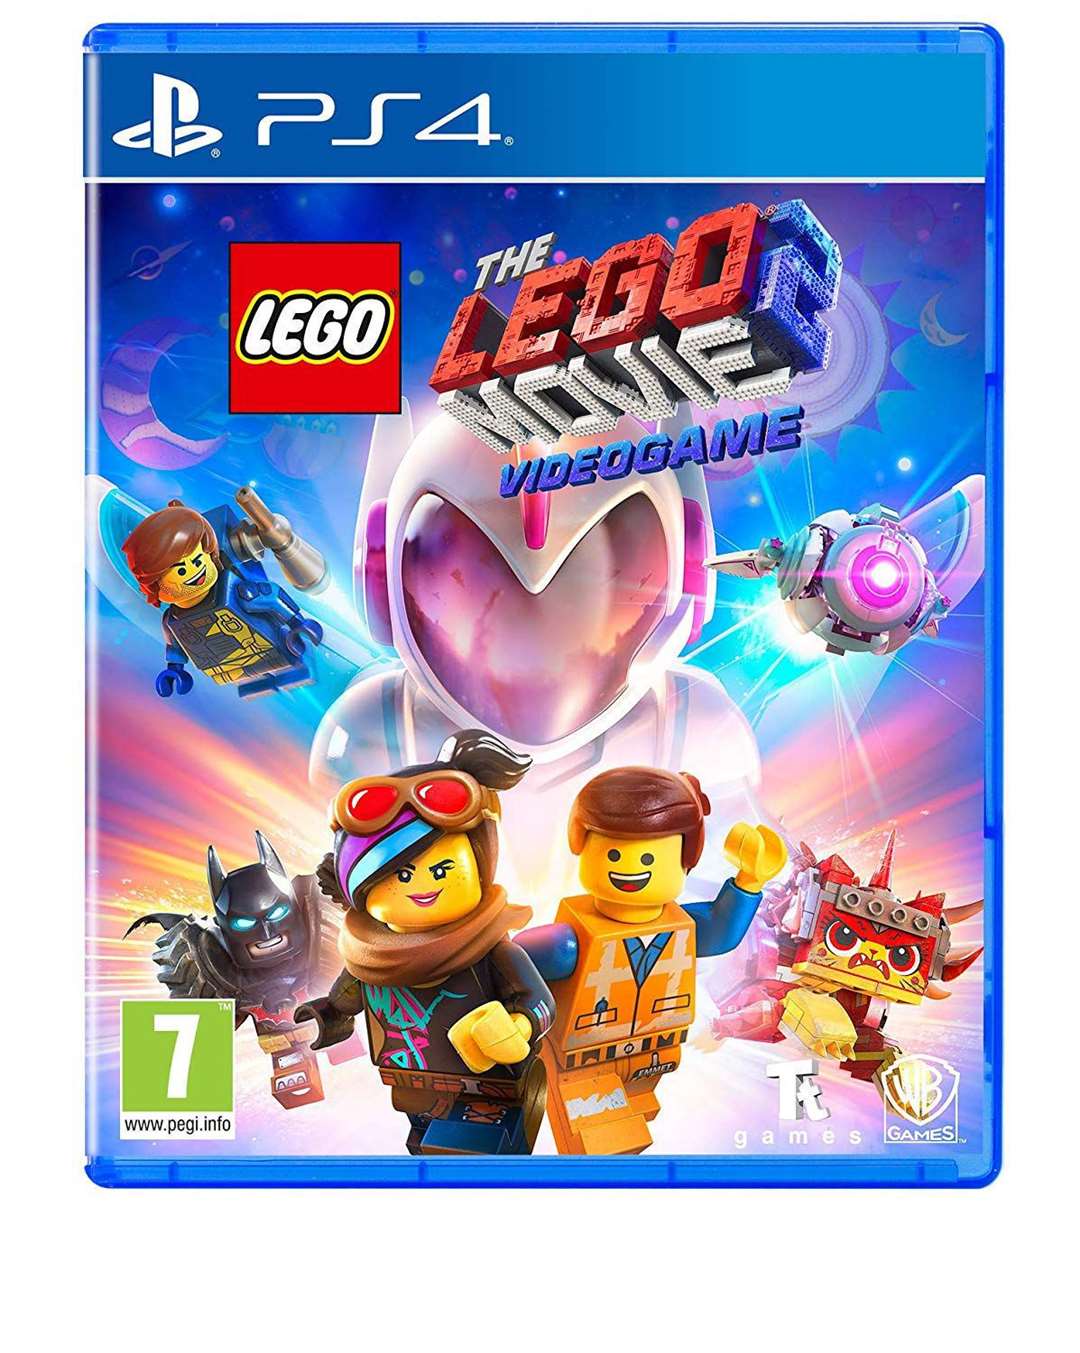 The LEGO Movie 2 Videogame. Picture:Handout/PA